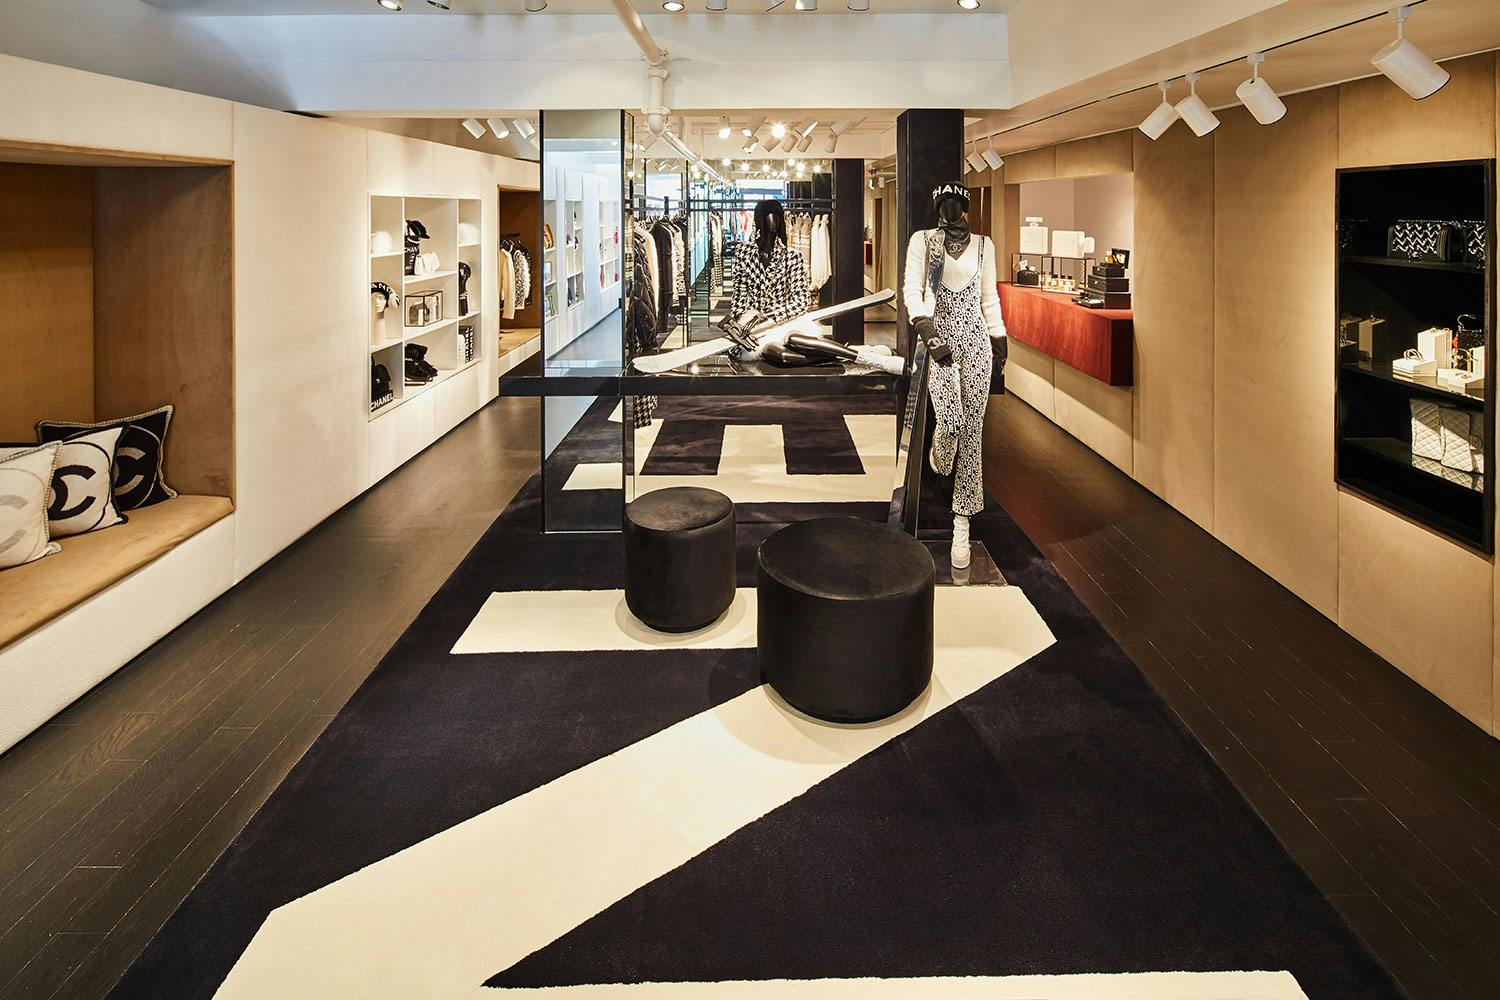 An Exclusive Look Inside Chanel's New Hamptons Popup Boutique